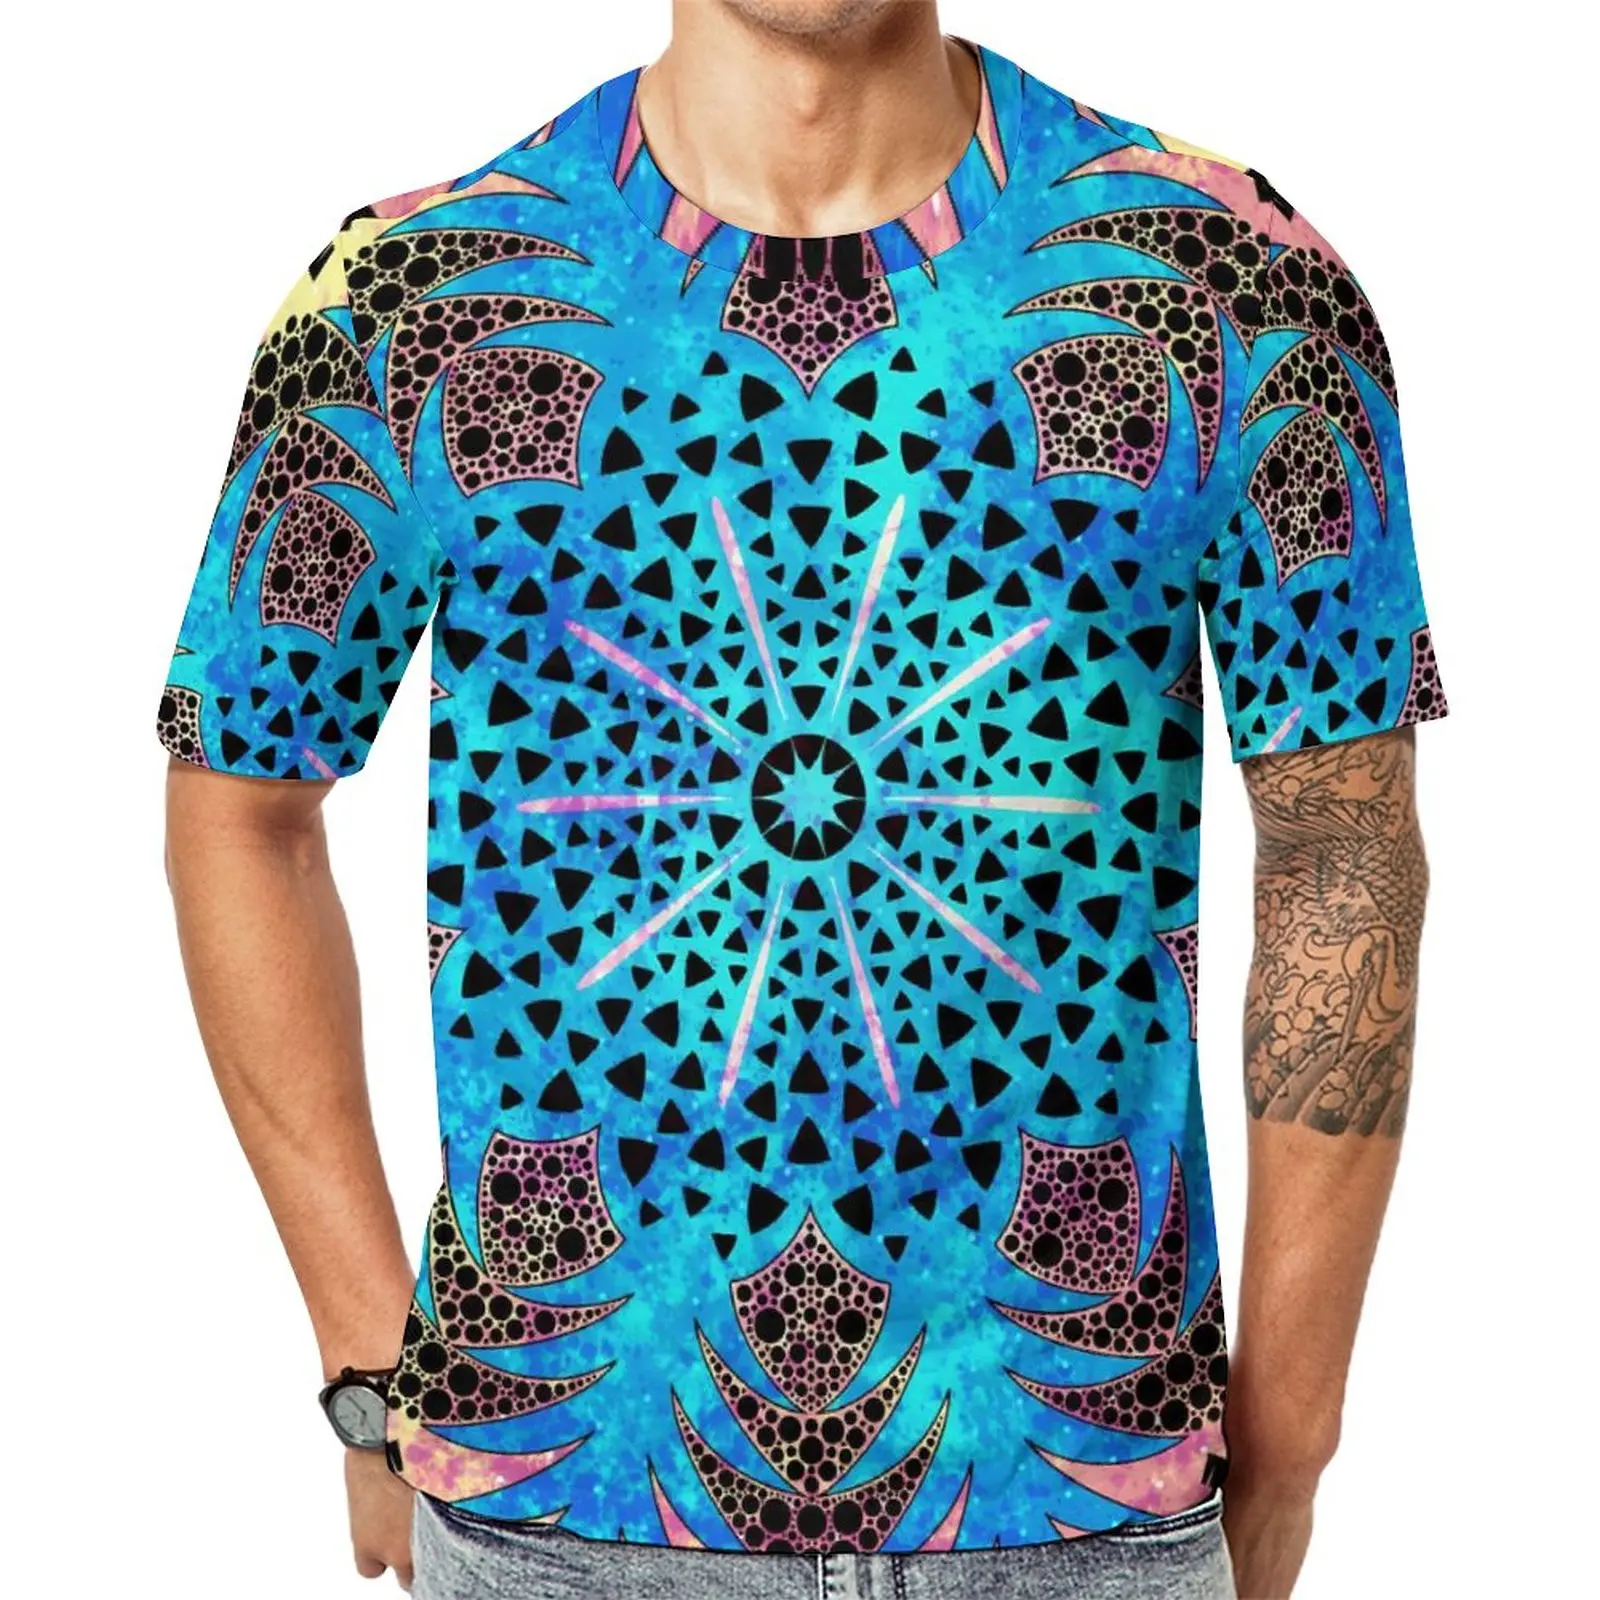 

Vibrant Mandala T Shirt Blue And Pink Pineapple Male Fashion T-Shirts Summer Graphic Tees Short-Sleeve Streetwear Oversized Tops